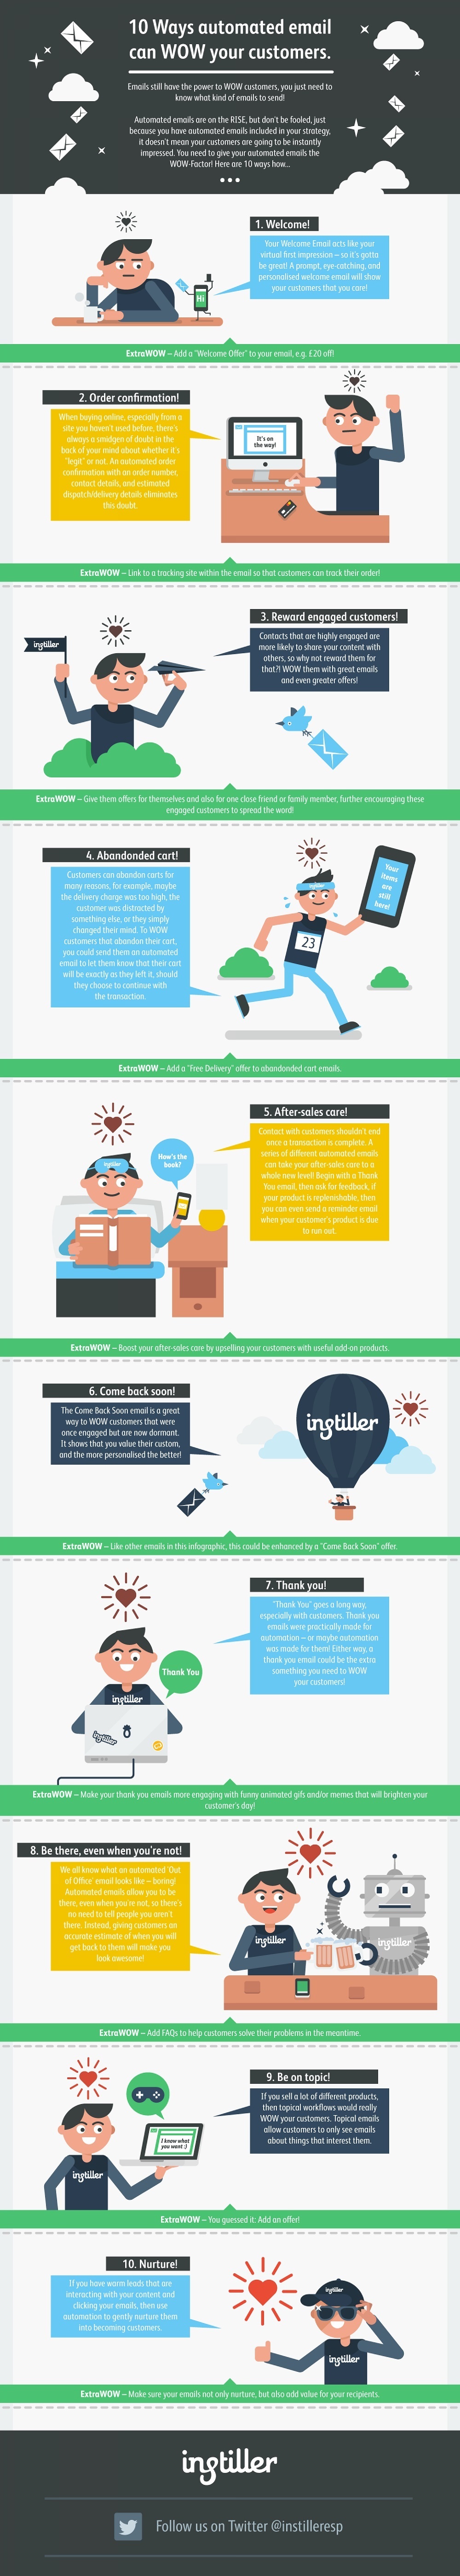 160326-10-ways-automated-email-can-wow-your-customers-infographic